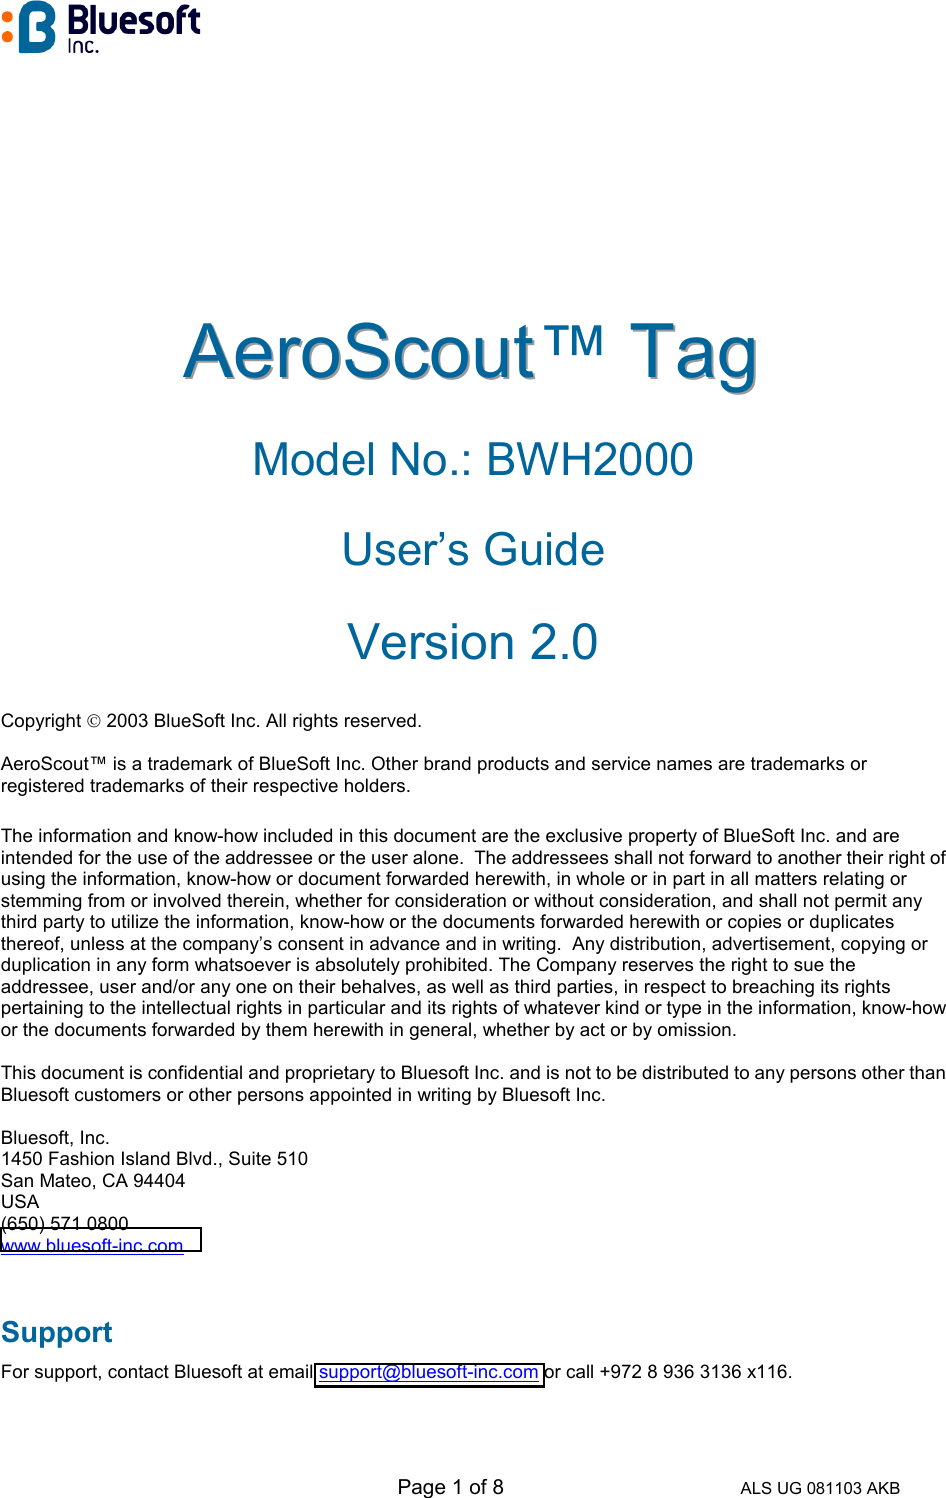   Page 1 of 8 ALS UG 081103 AKB AAAeeerrroooSSScccooouuuttt™ TTTaaaggg   Model No.: BWH2000 User’s Guide Version 2.0 Copyright  2003 BlueSoft Inc. All rights reserved.  AeroScout™ is a trademark of BlueSoft Inc. Other brand products and service names are trademarks or registered trademarks of their respective holders.  The information and know-how included in this document are the exclusive property of BlueSoft Inc. and are intended for the use of the addressee or the user alone.  The addressees shall not forward to another their right of using the information, know-how or document forwarded herewith, in whole or in part in all matters relating or stemming from or involved therein, whether for consideration or without consideration, and shall not permit any third party to utilize the information, know-how or the documents forwarded herewith or copies or duplicates thereof, unless at the company’s consent in advance and in writing.  Any distribution, advertisement, copying or duplication in any form whatsoever is absolutely prohibited. The Company reserves the right to sue the addressee, user and/or any one on their behalves, as well as third parties, in respect to breaching its rights pertaining to the intellectual rights in particular and its rights of whatever kind or type in the information, know-how or the documents forwarded by them herewith in general, whether by act or by omission.  This document is confidential and proprietary to Bluesoft Inc. and is not to be distributed to any persons other than Bluesoft customers or other persons appointed in writing by Bluesoft Inc.  Bluesoft, Inc. 1450 Fashion Island Blvd., Suite 510 San Mateo, CA 94404 USA (650) 571 0800 www.bluesoft-inc.com  Support For support, contact Bluesoft at email support@bluesoft-inc.com or call +972 8 936 3136 x116. 